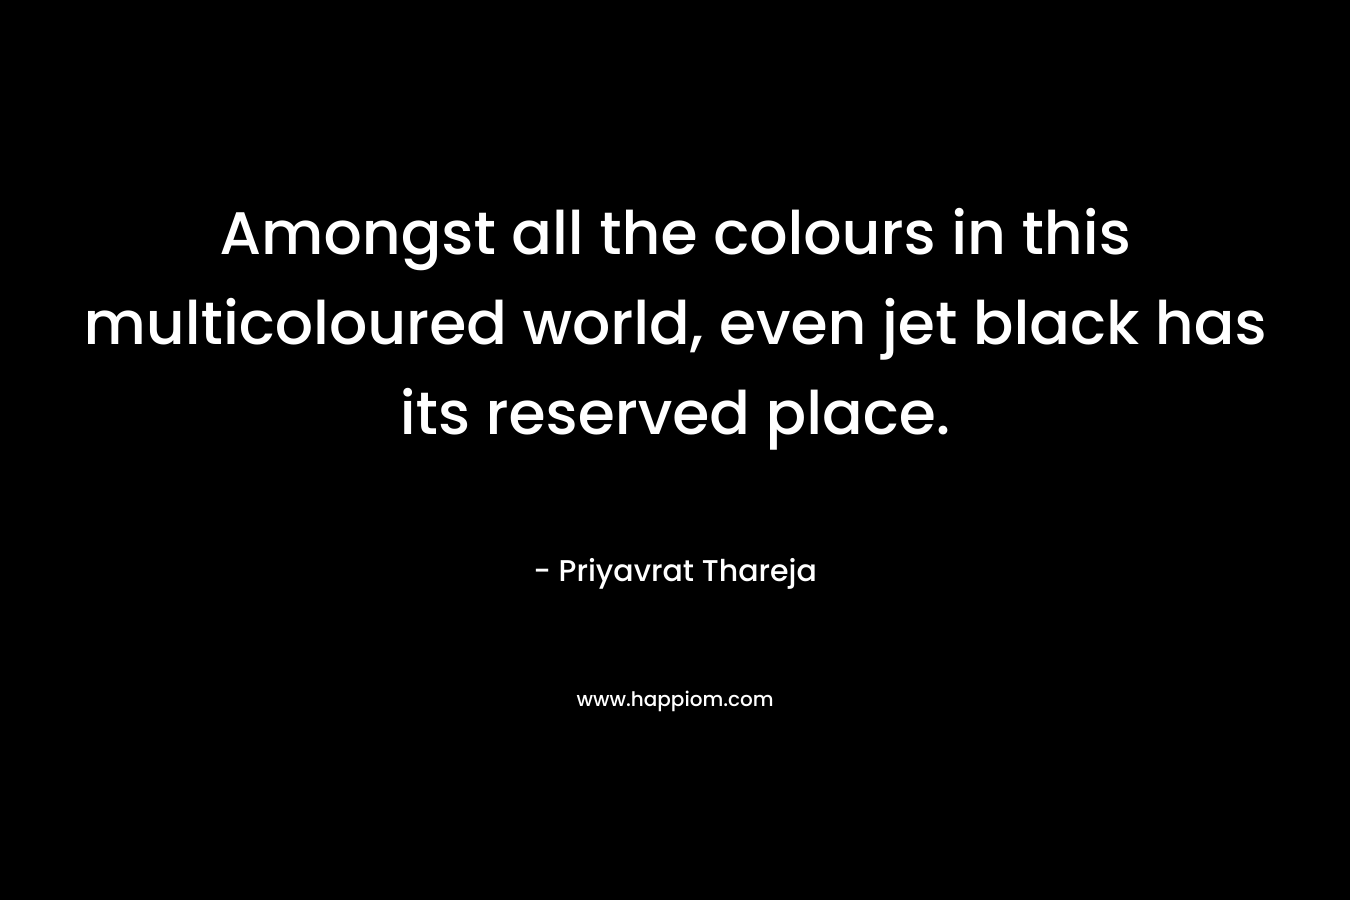 Amongst all the colours in this multicoloured world, even jet black has its reserved place.